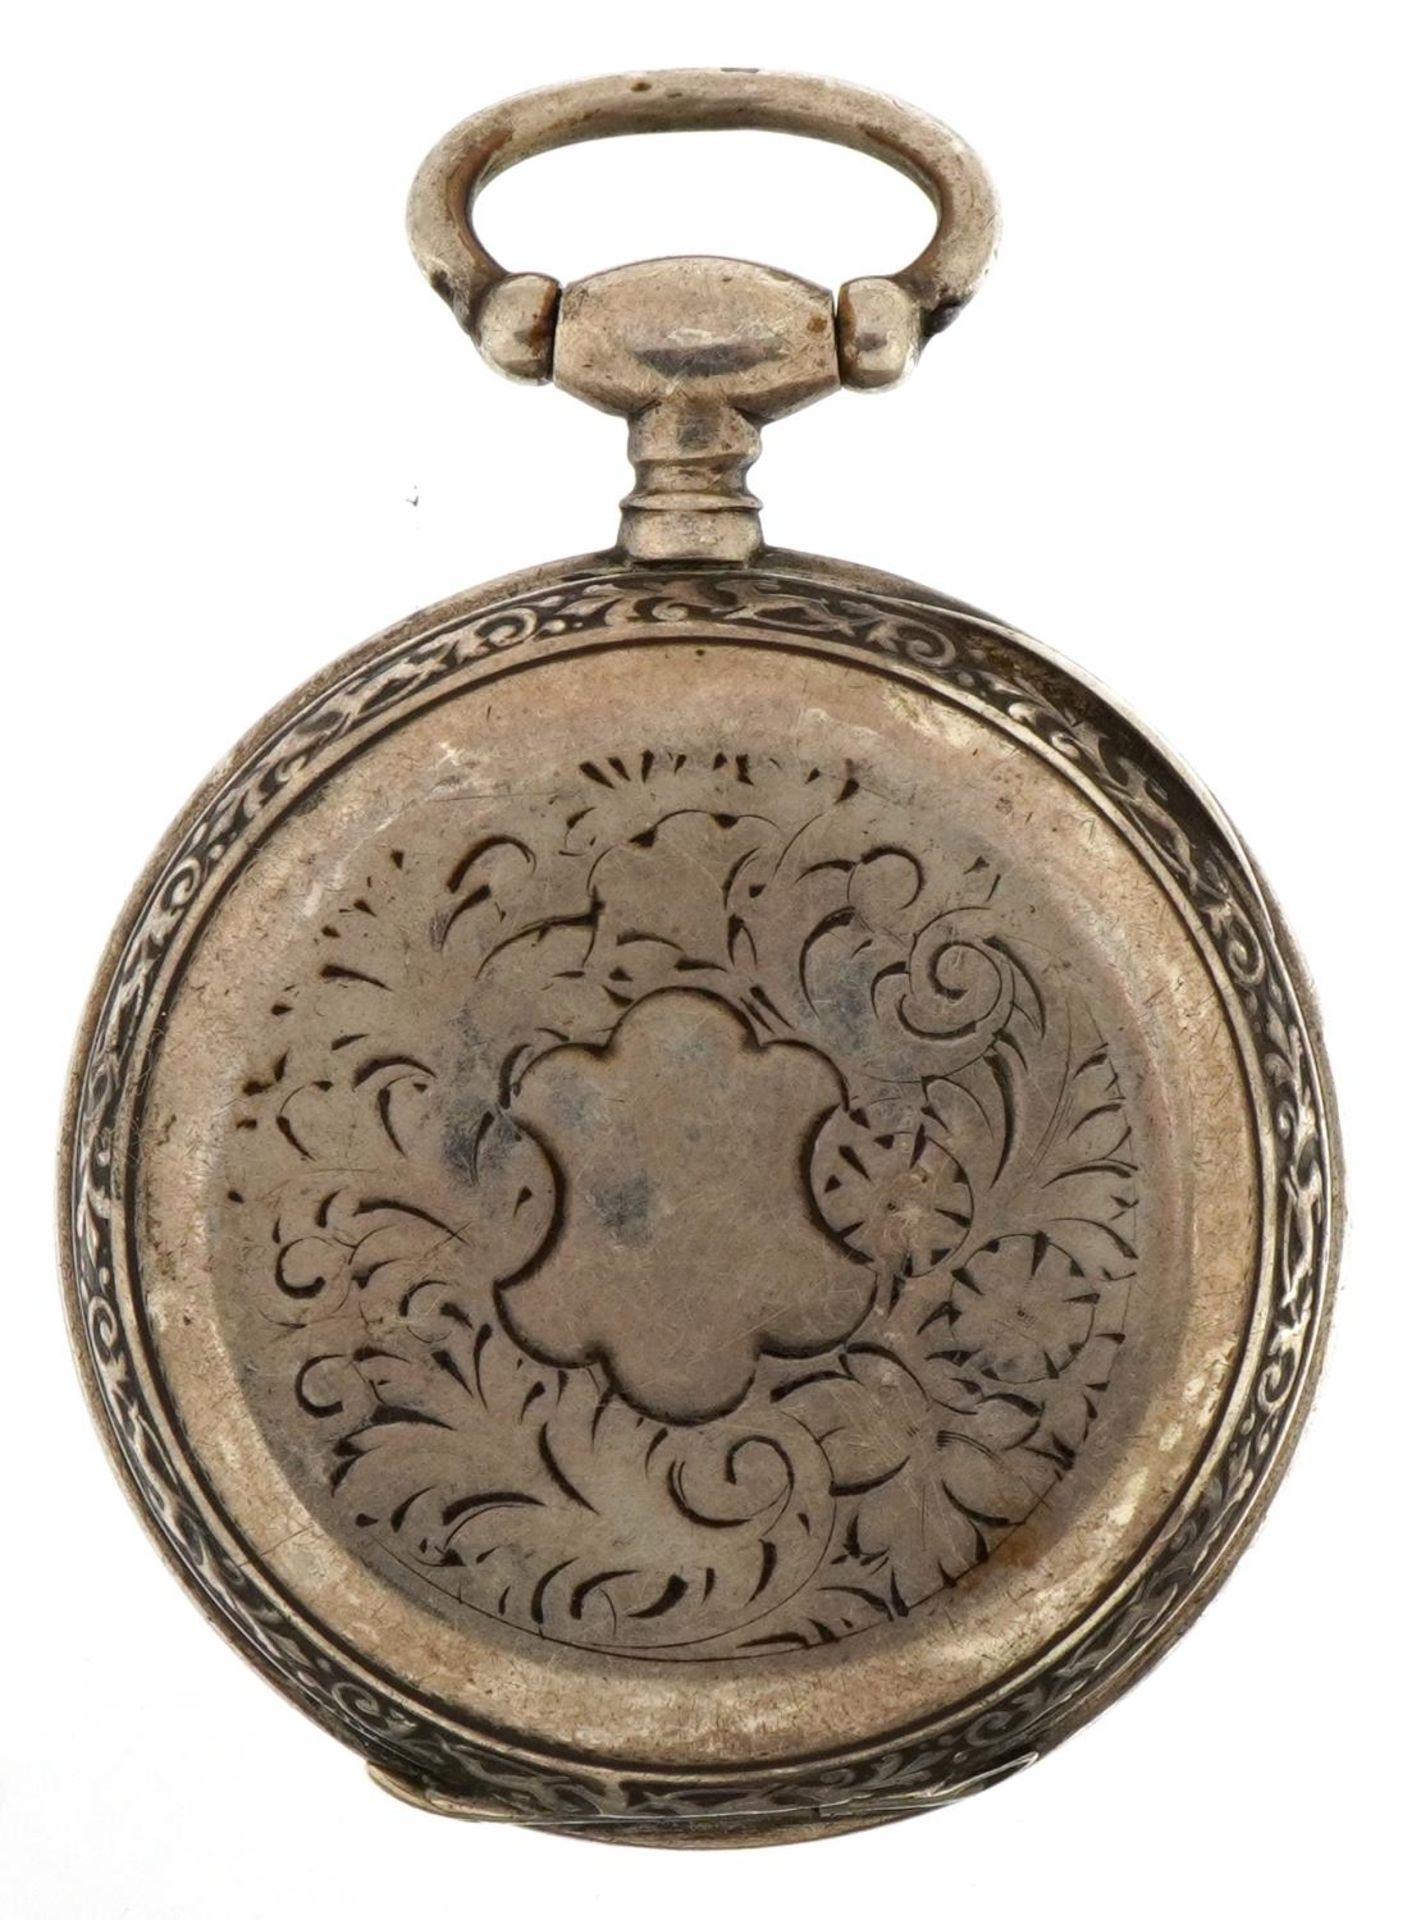 Hewet Chartier white metal open face pocket watch with enamelled dial, the case marked Argent Fin, - Image 2 of 6